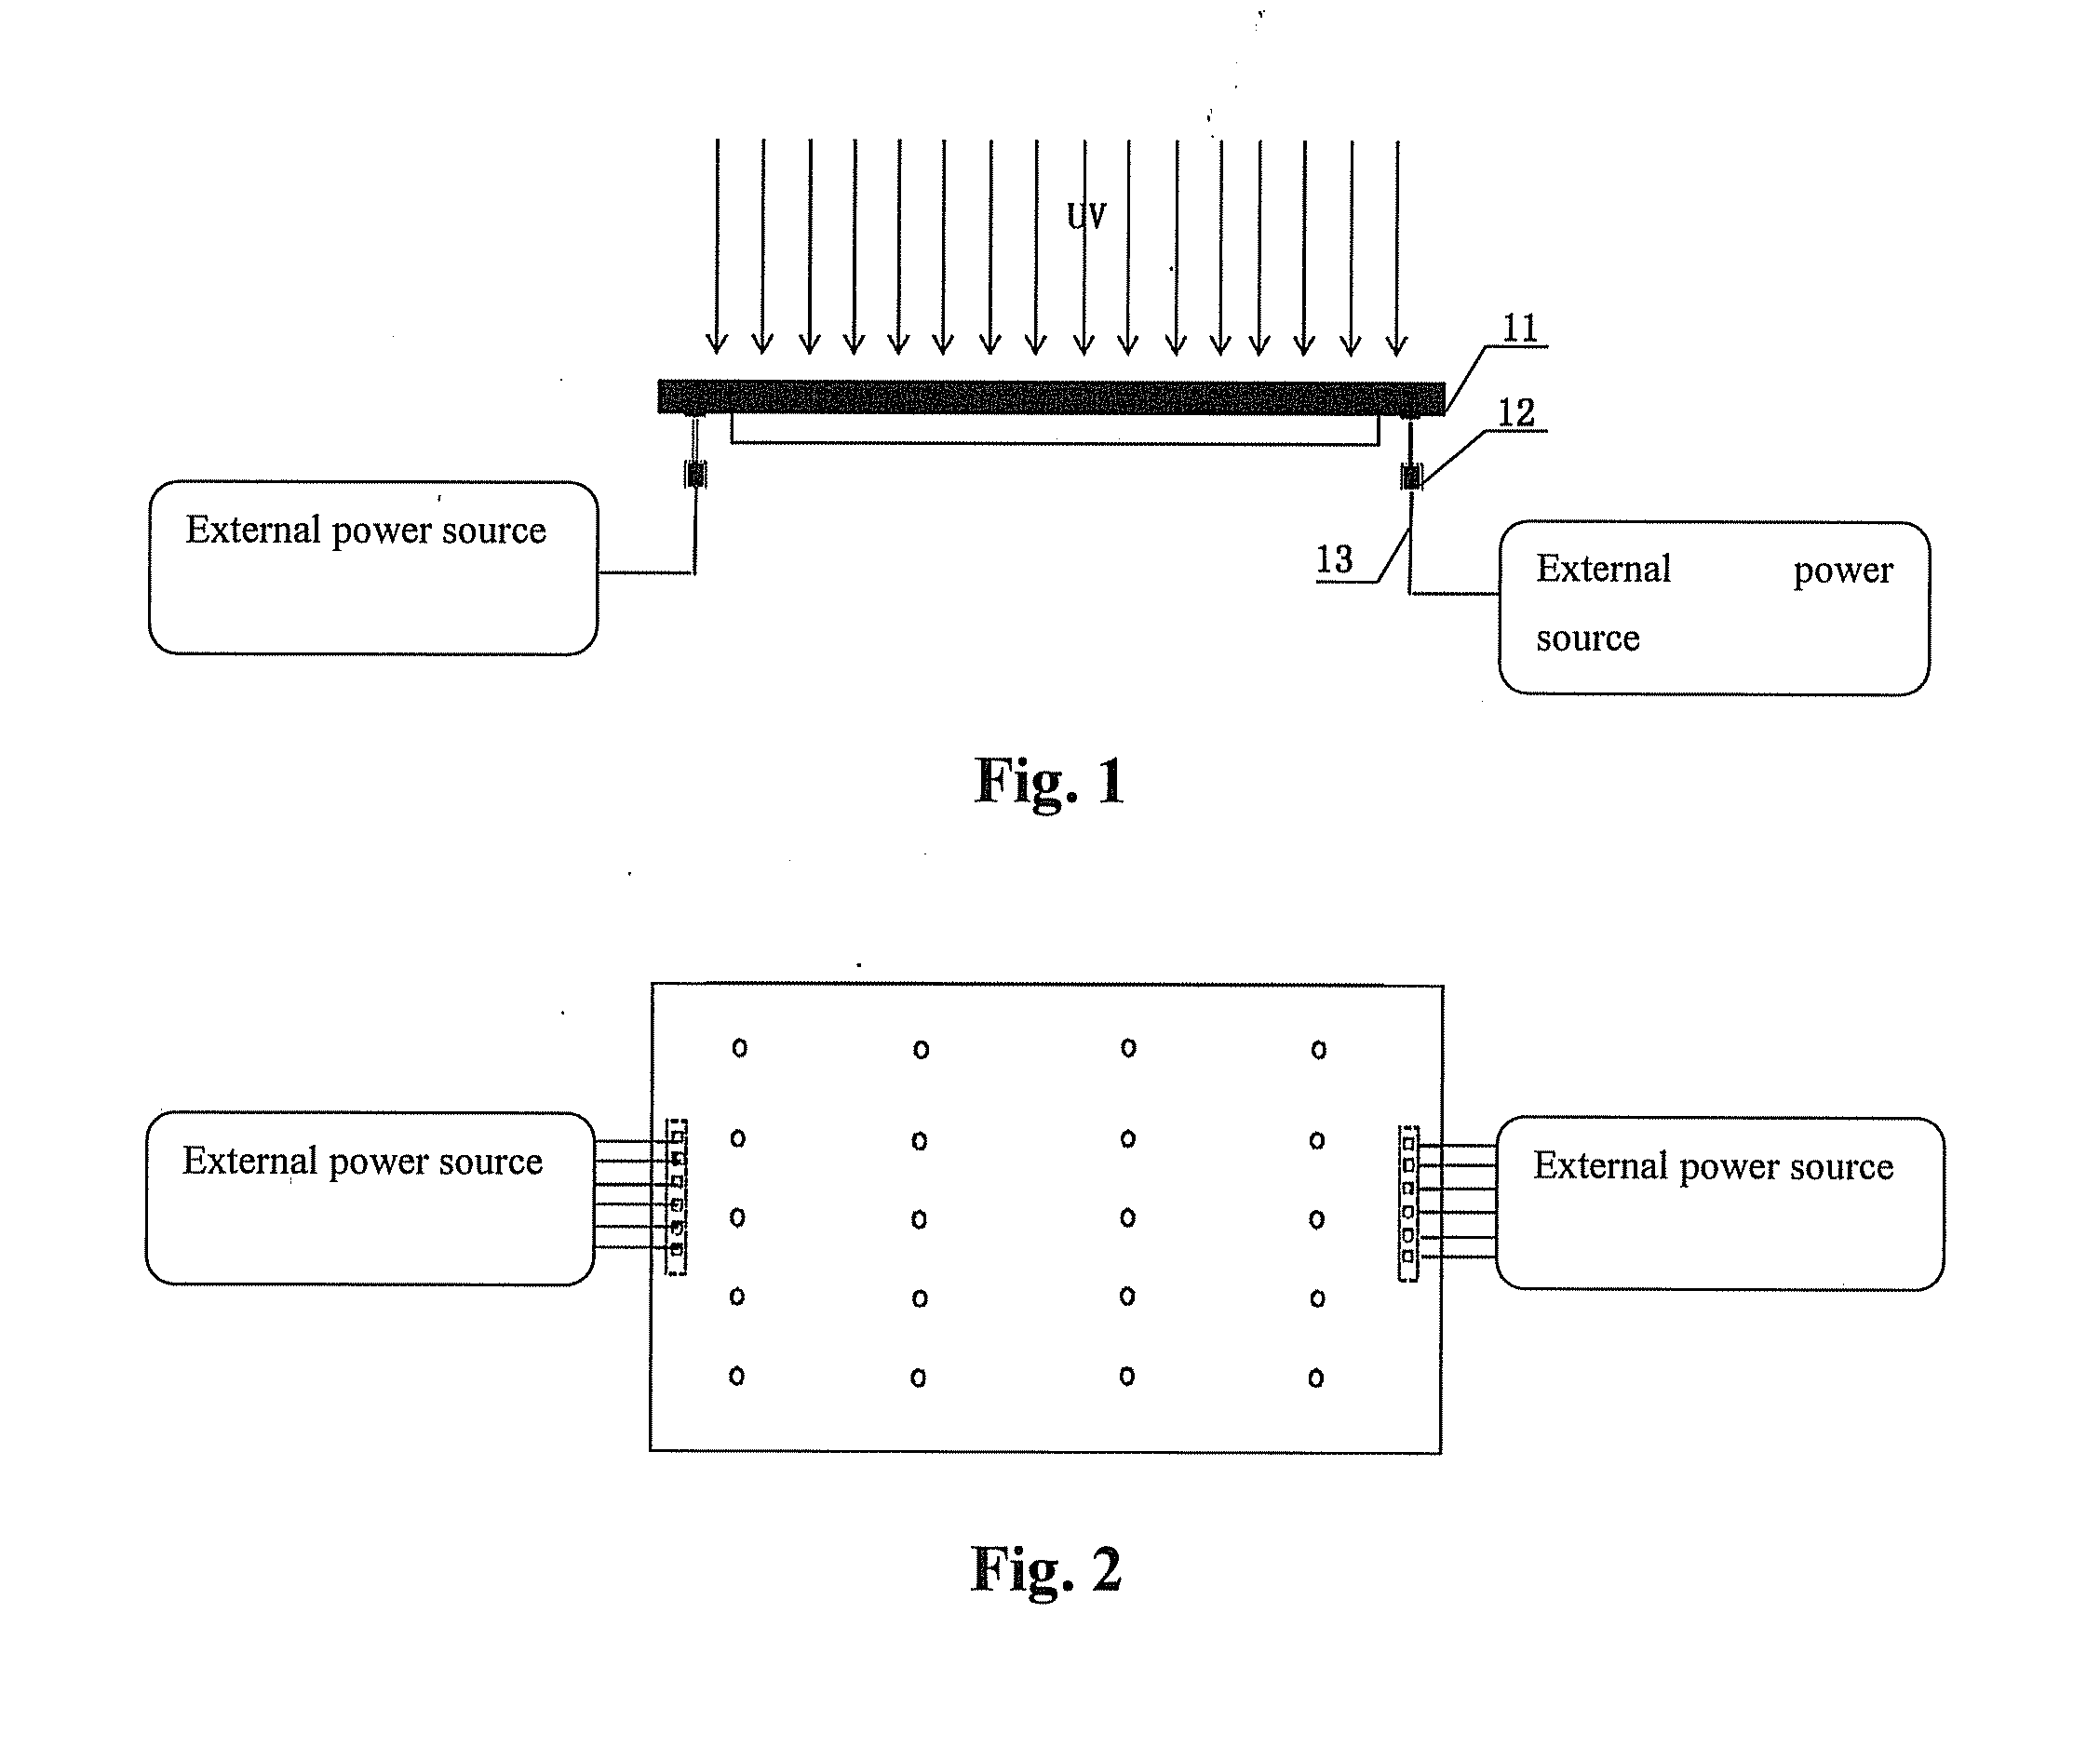 Probe module for detecting contact performance